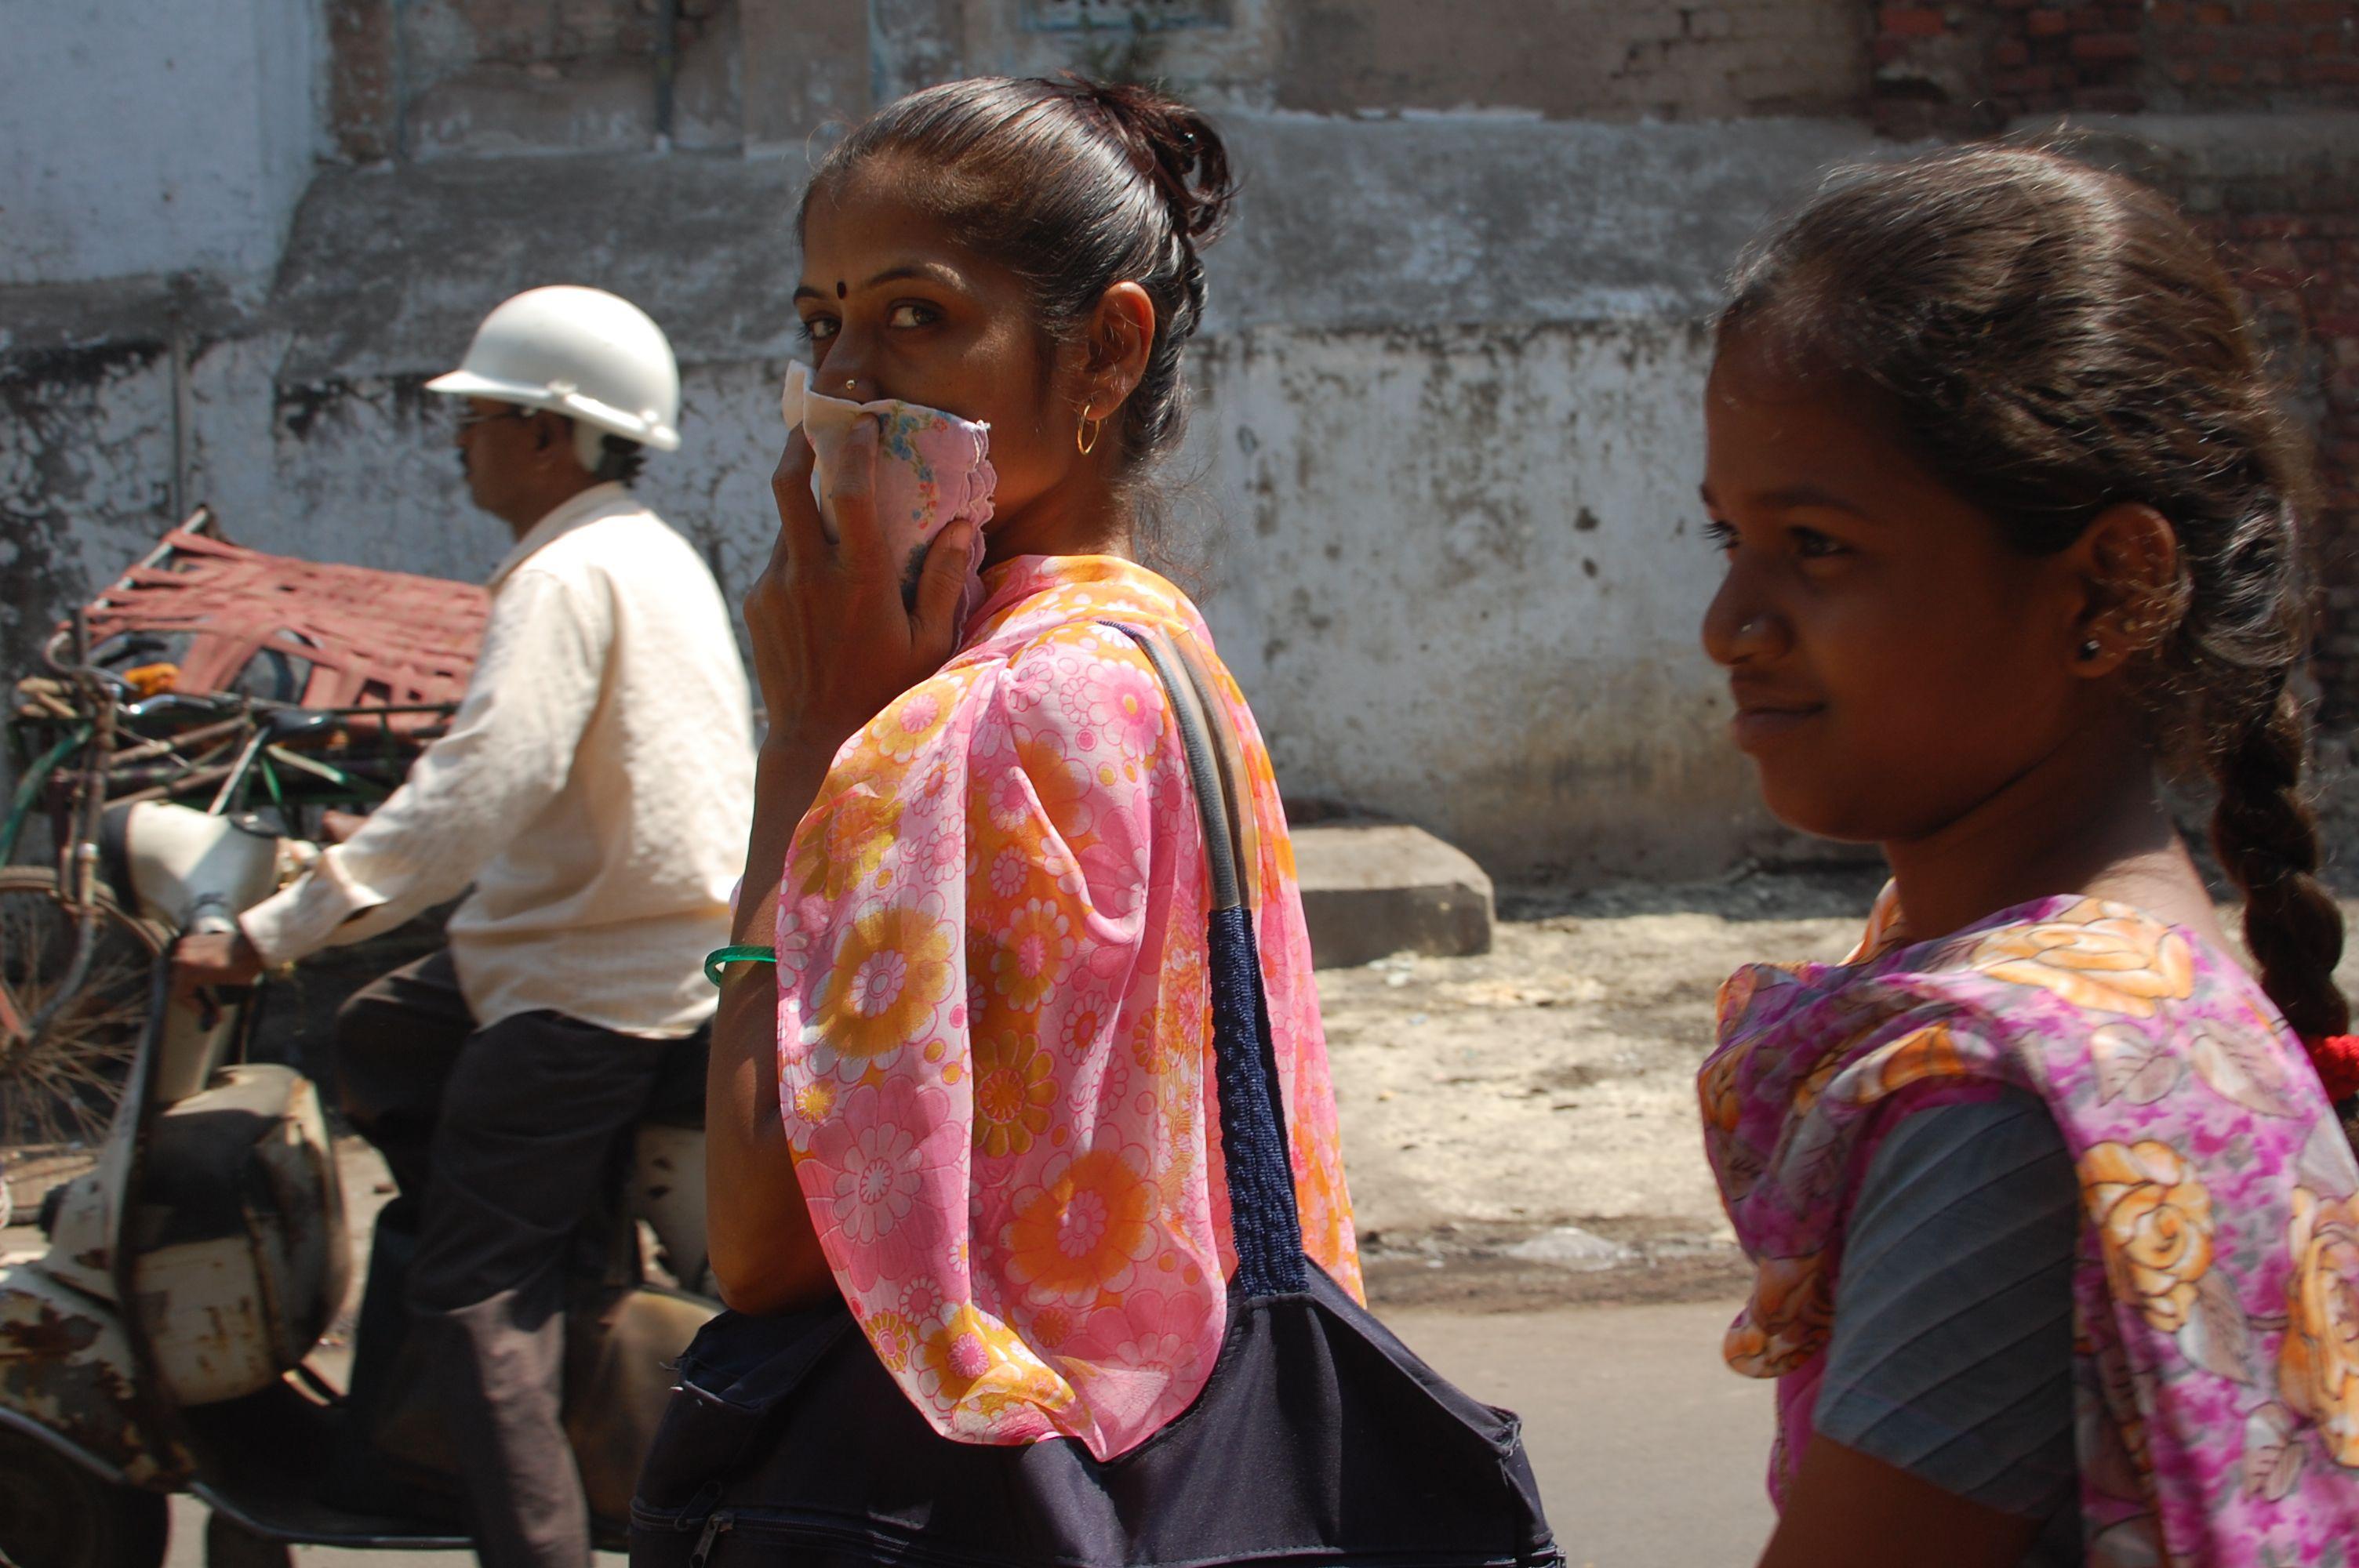 A woman covers her mouth with a handkerchief while walking through the streets of Ahmedabad, India. (Jill Ryan / WBUR Boston’s NPR News Station / Flickr)